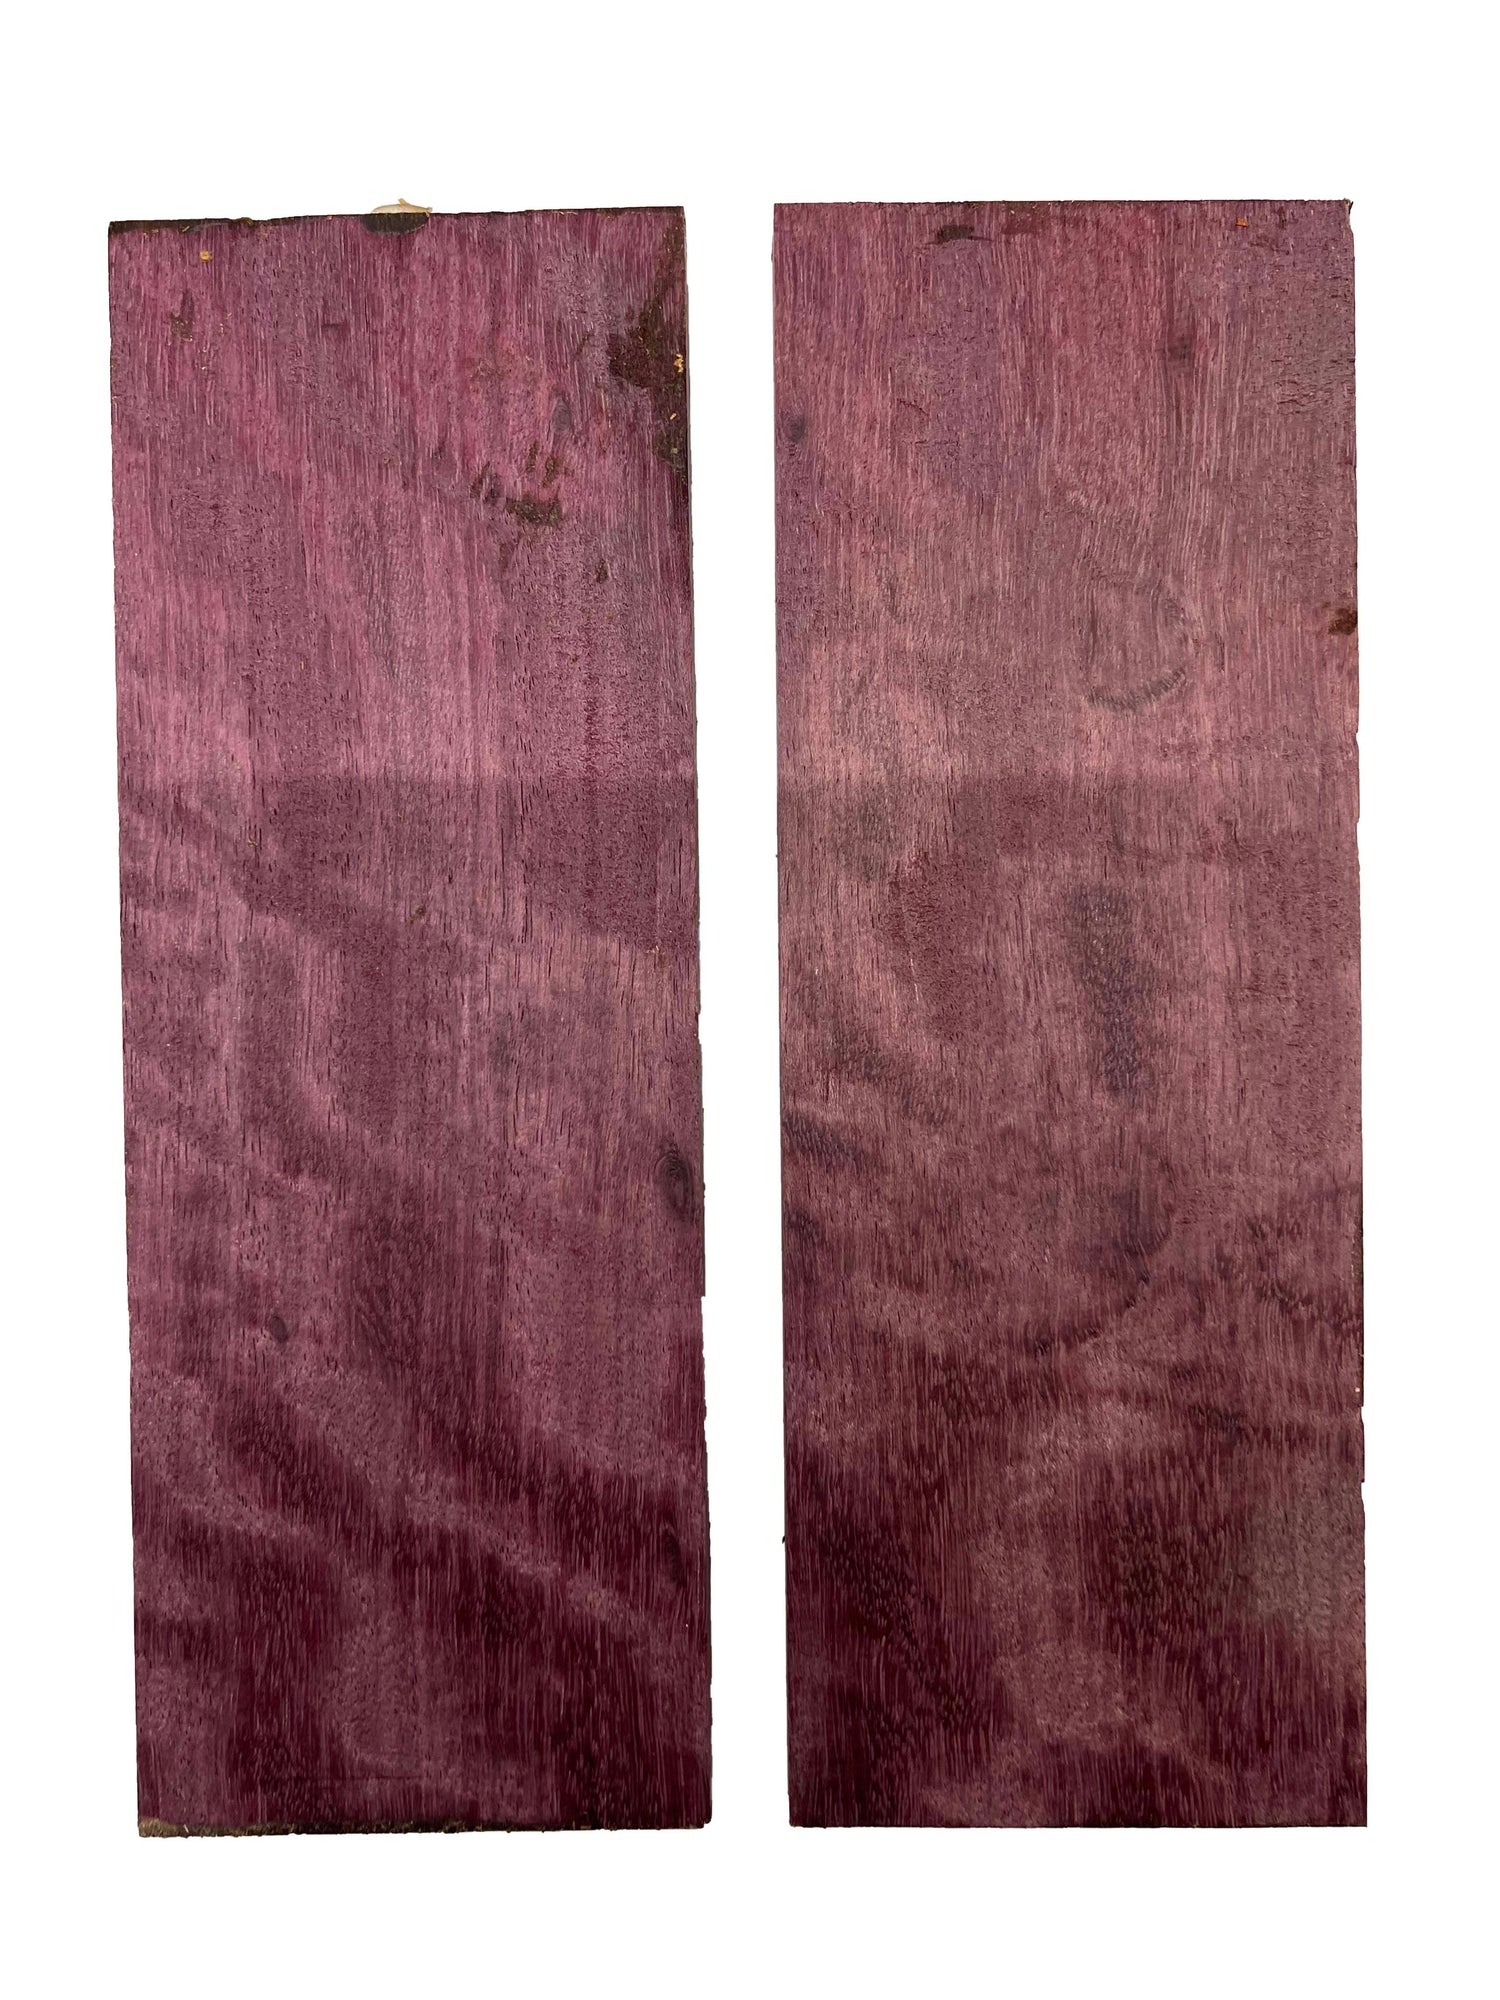 Pack Of 2, Purpleheart Thin Stock Three Dimensional Lumber Wood Blank 11&quot;x4&quot;x5/8&quot; 